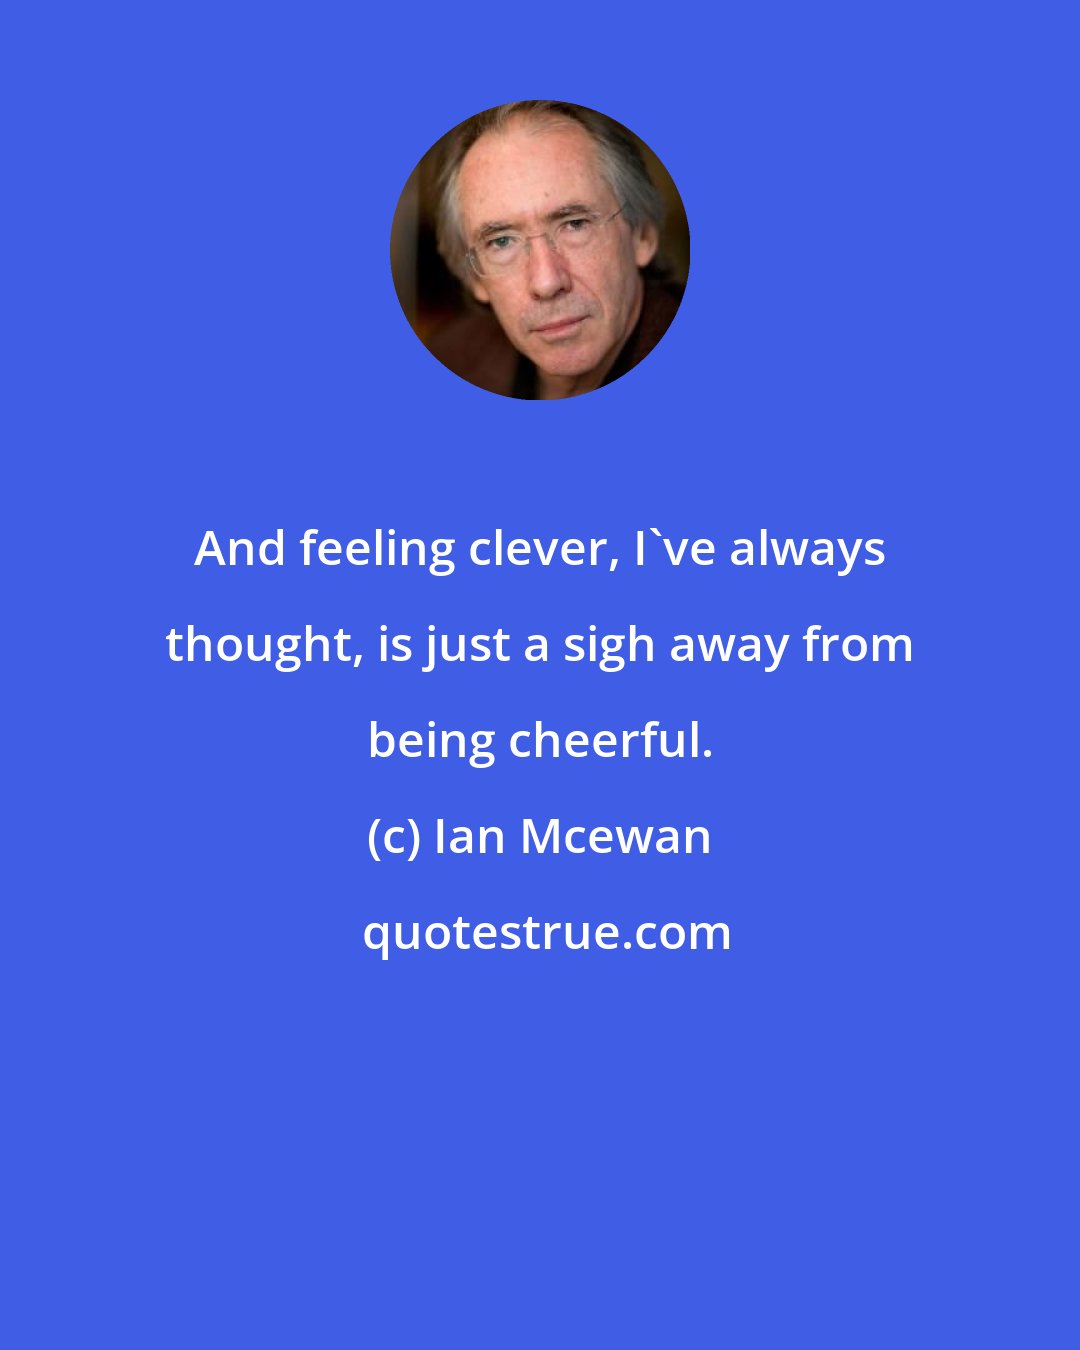 Ian Mcewan: And feeling clever, I've always thought, is just a sigh away from being cheerful.